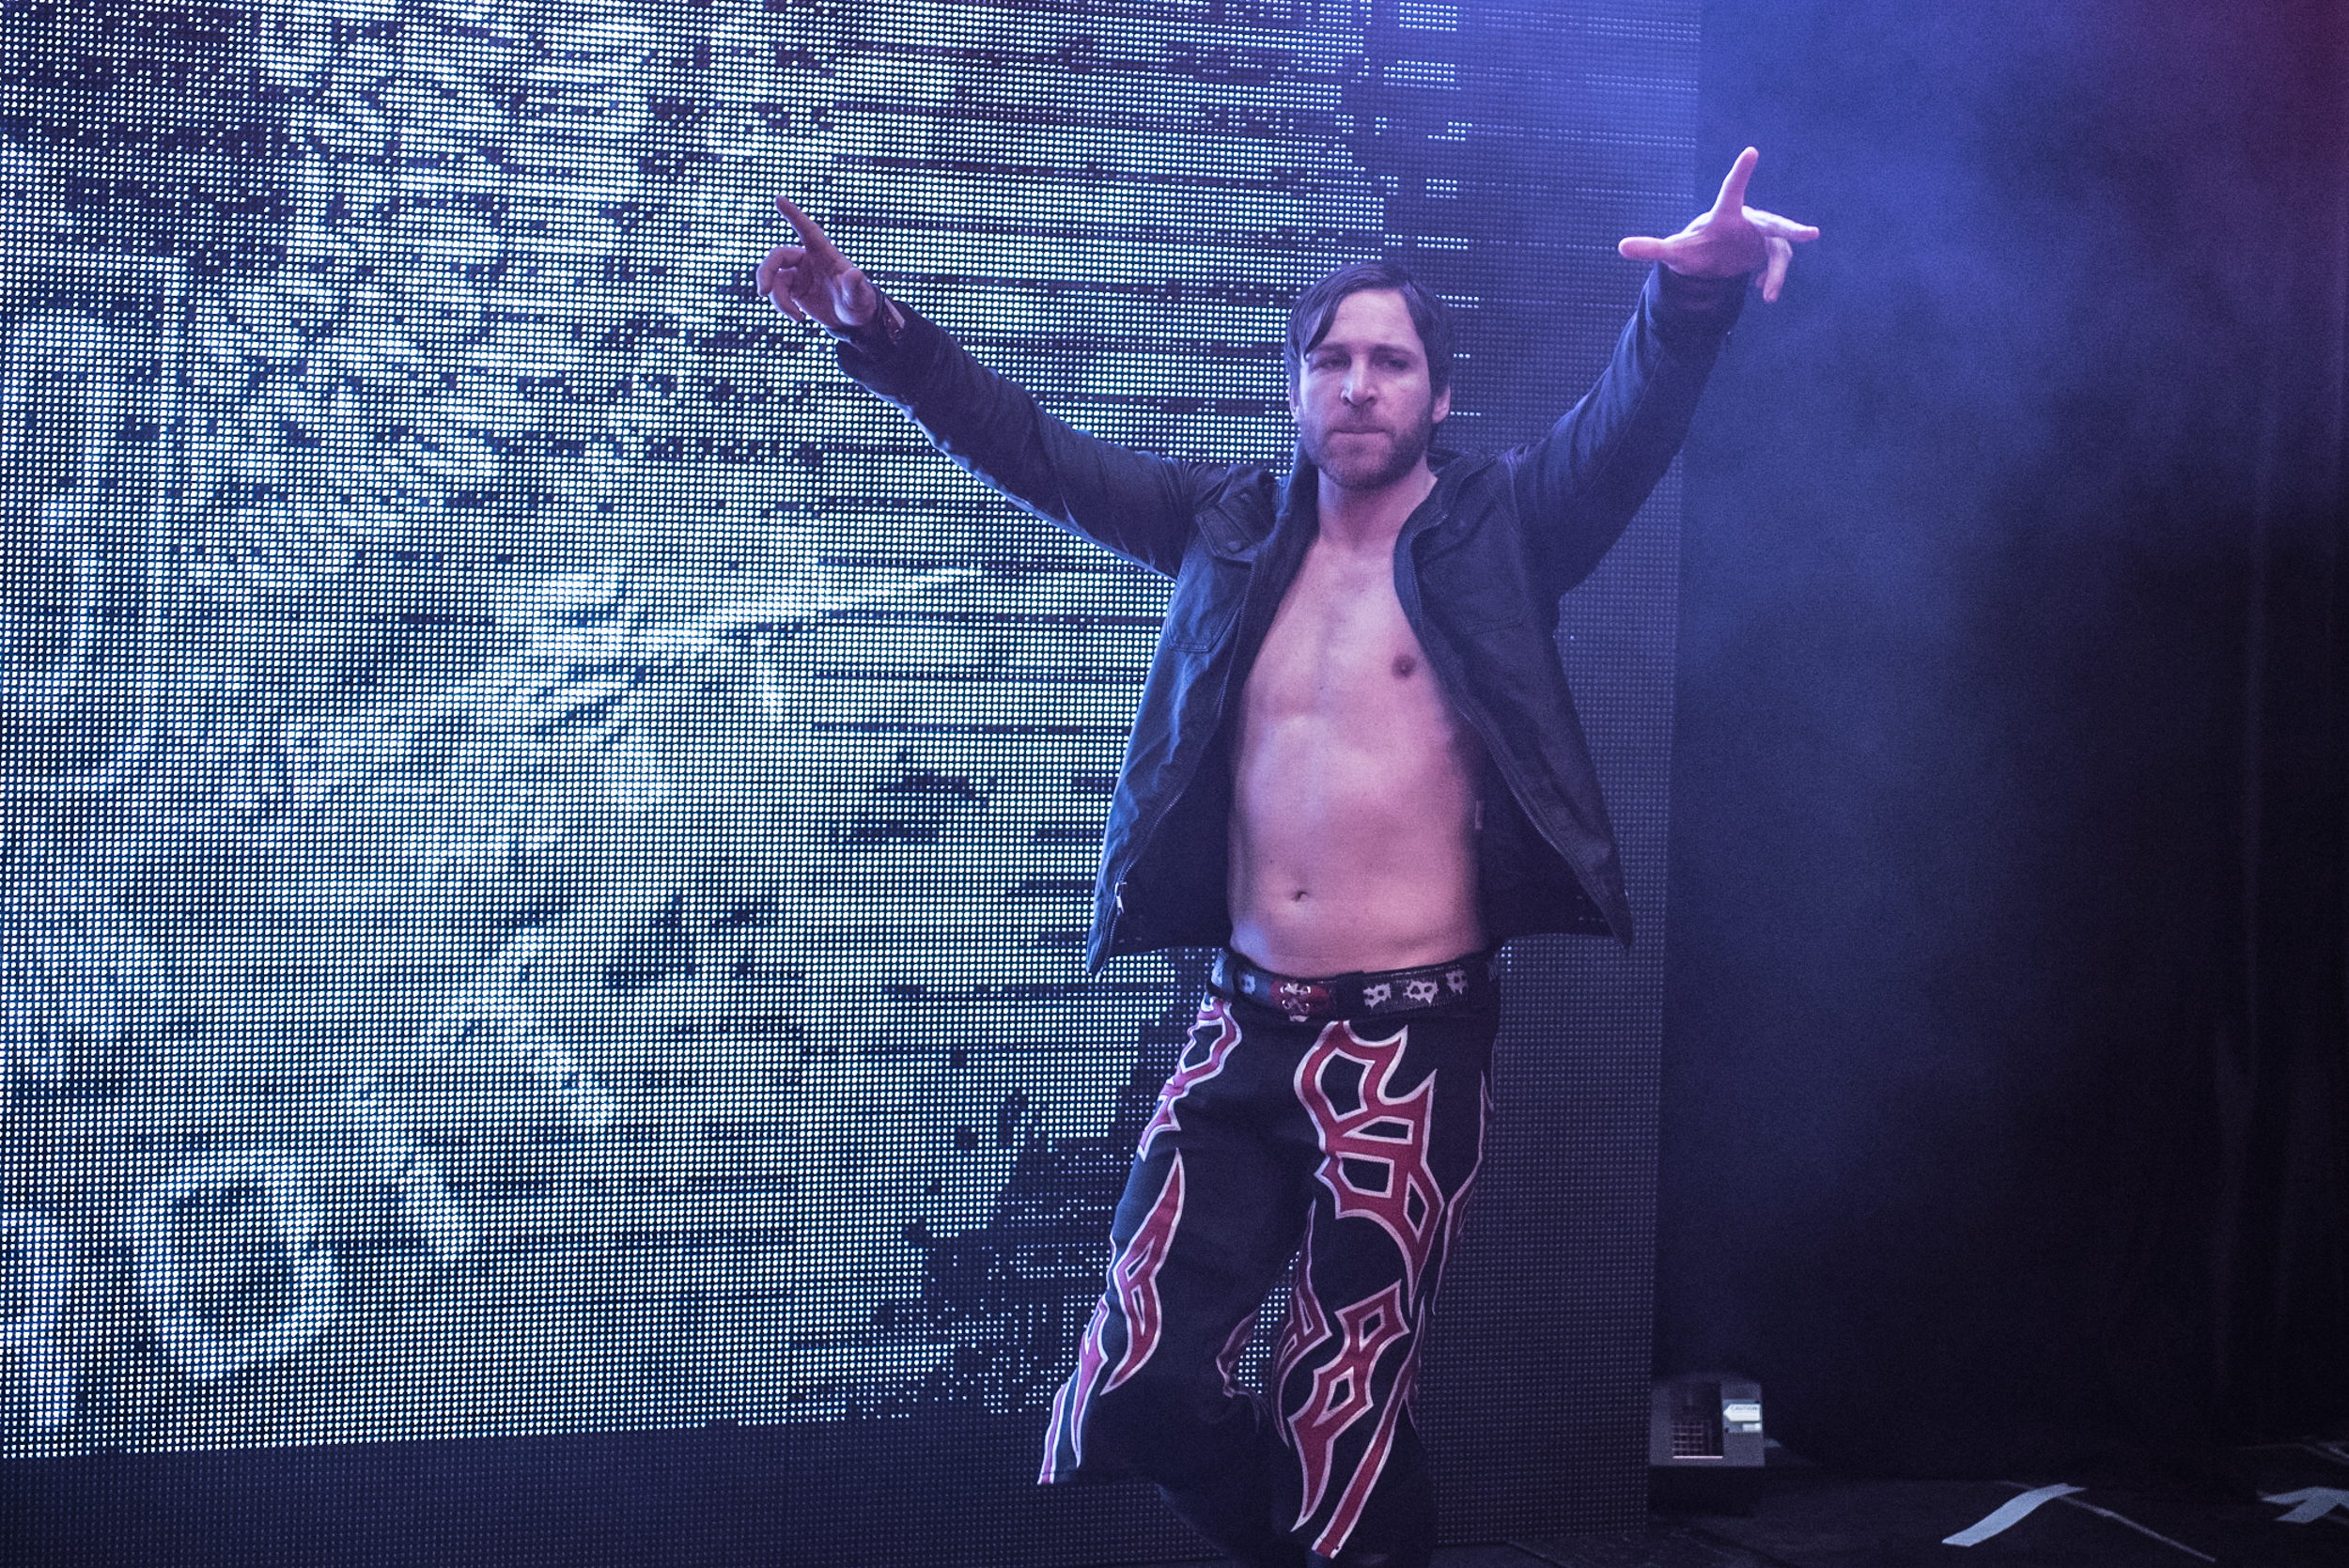 Ring of Honor’s Chris Sabin discusses Best of the Super Juniors2018, music, video games and the Motor City Machineguns